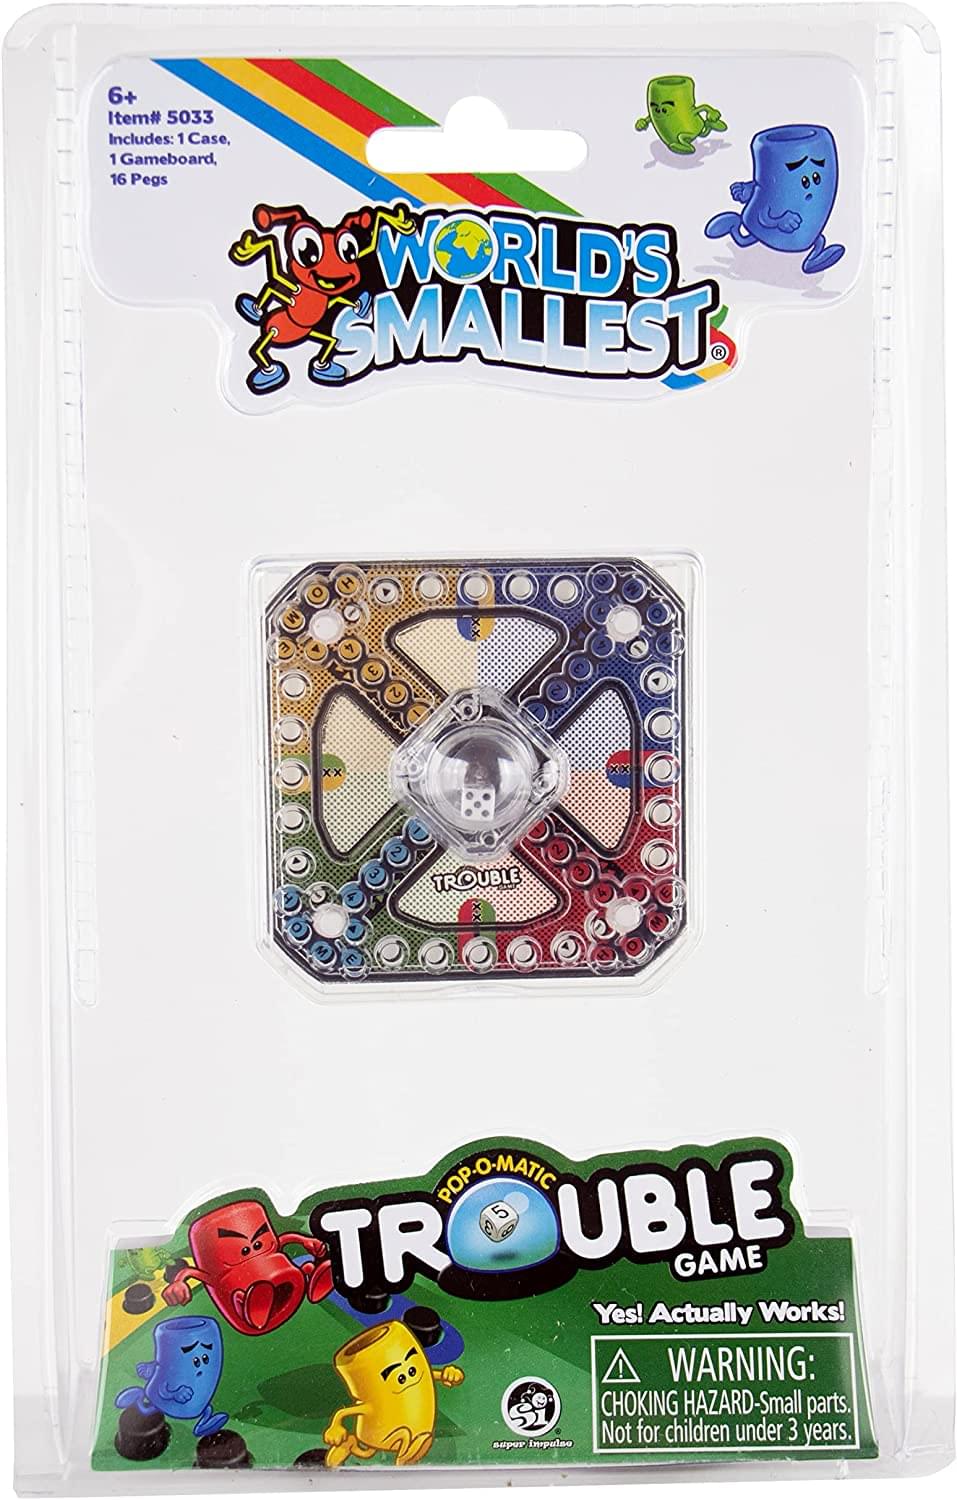 Worlds Smallest Trouble Game